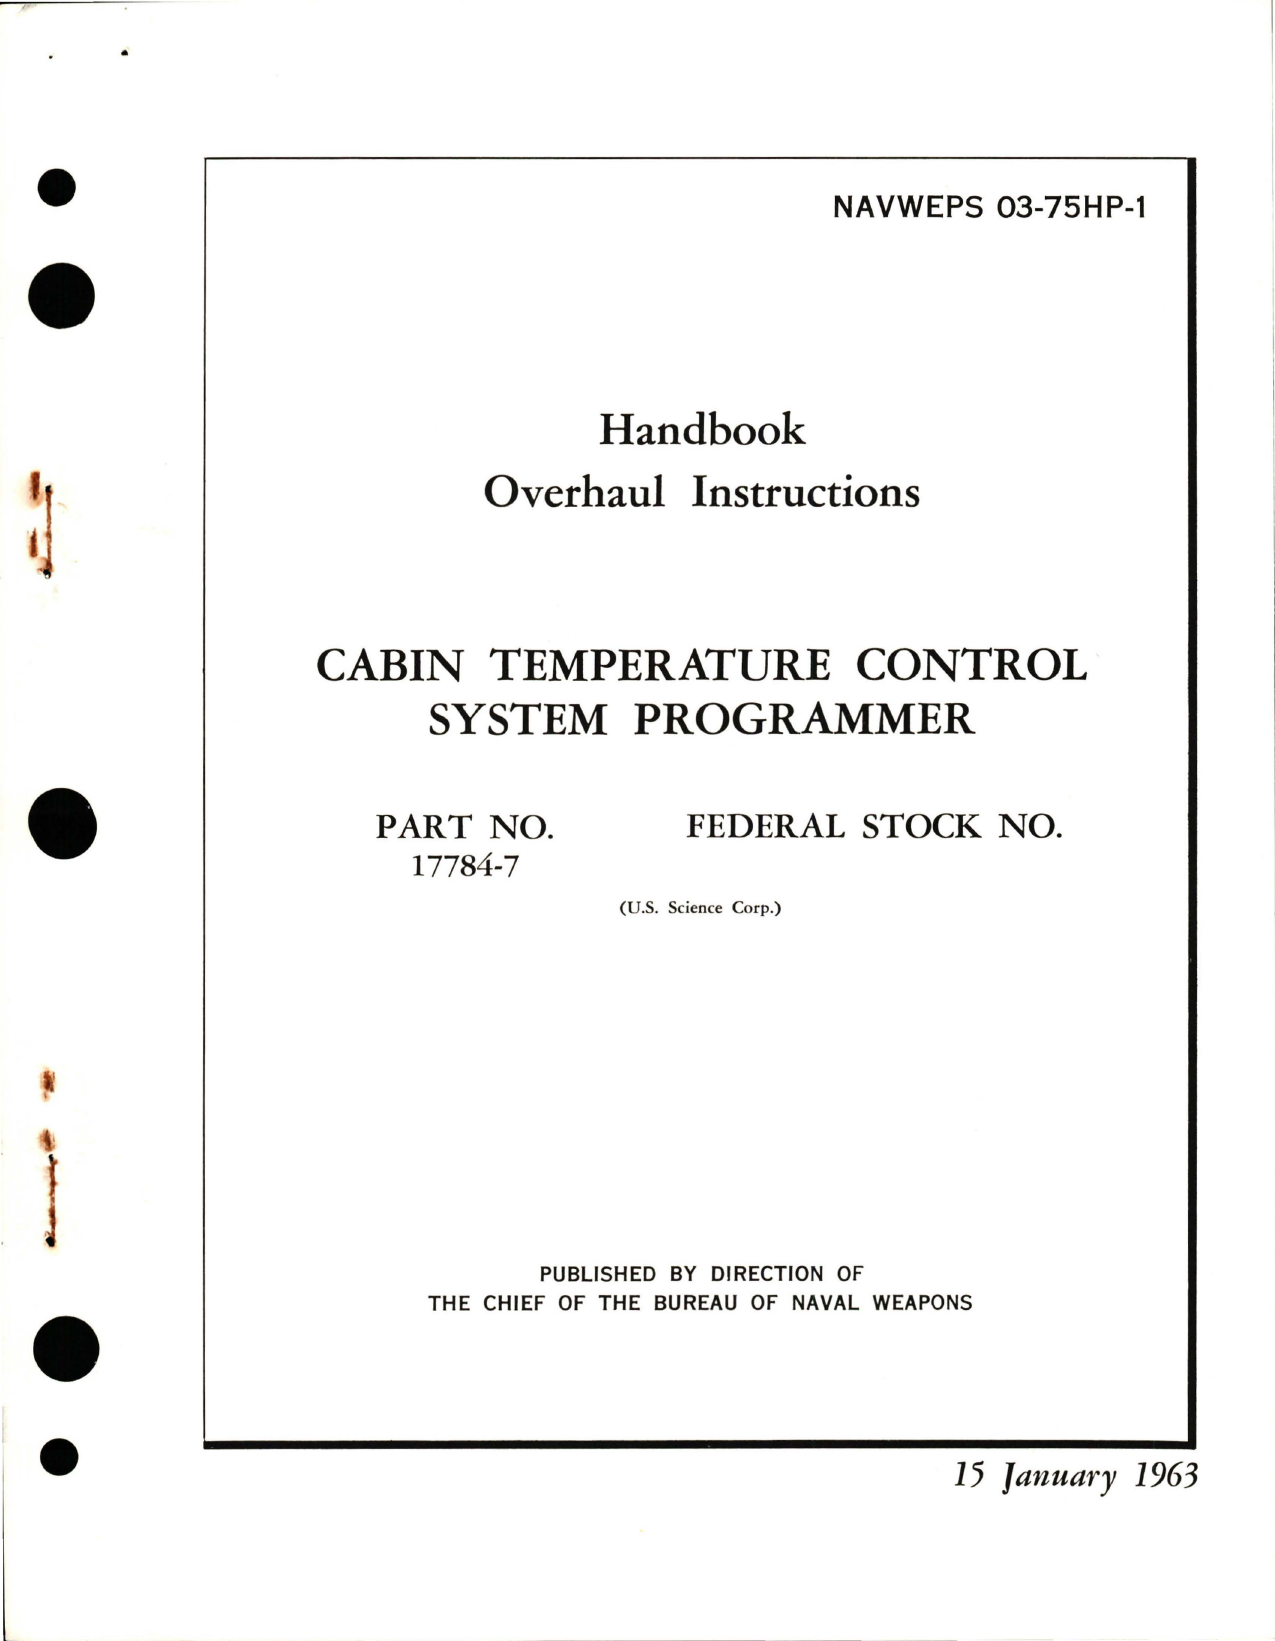 Sample page 1 from AirCorps Library document: Overhaul Instructions for Cabin Temperature Control System Programmer - Parts 17784-7 and 17784-9